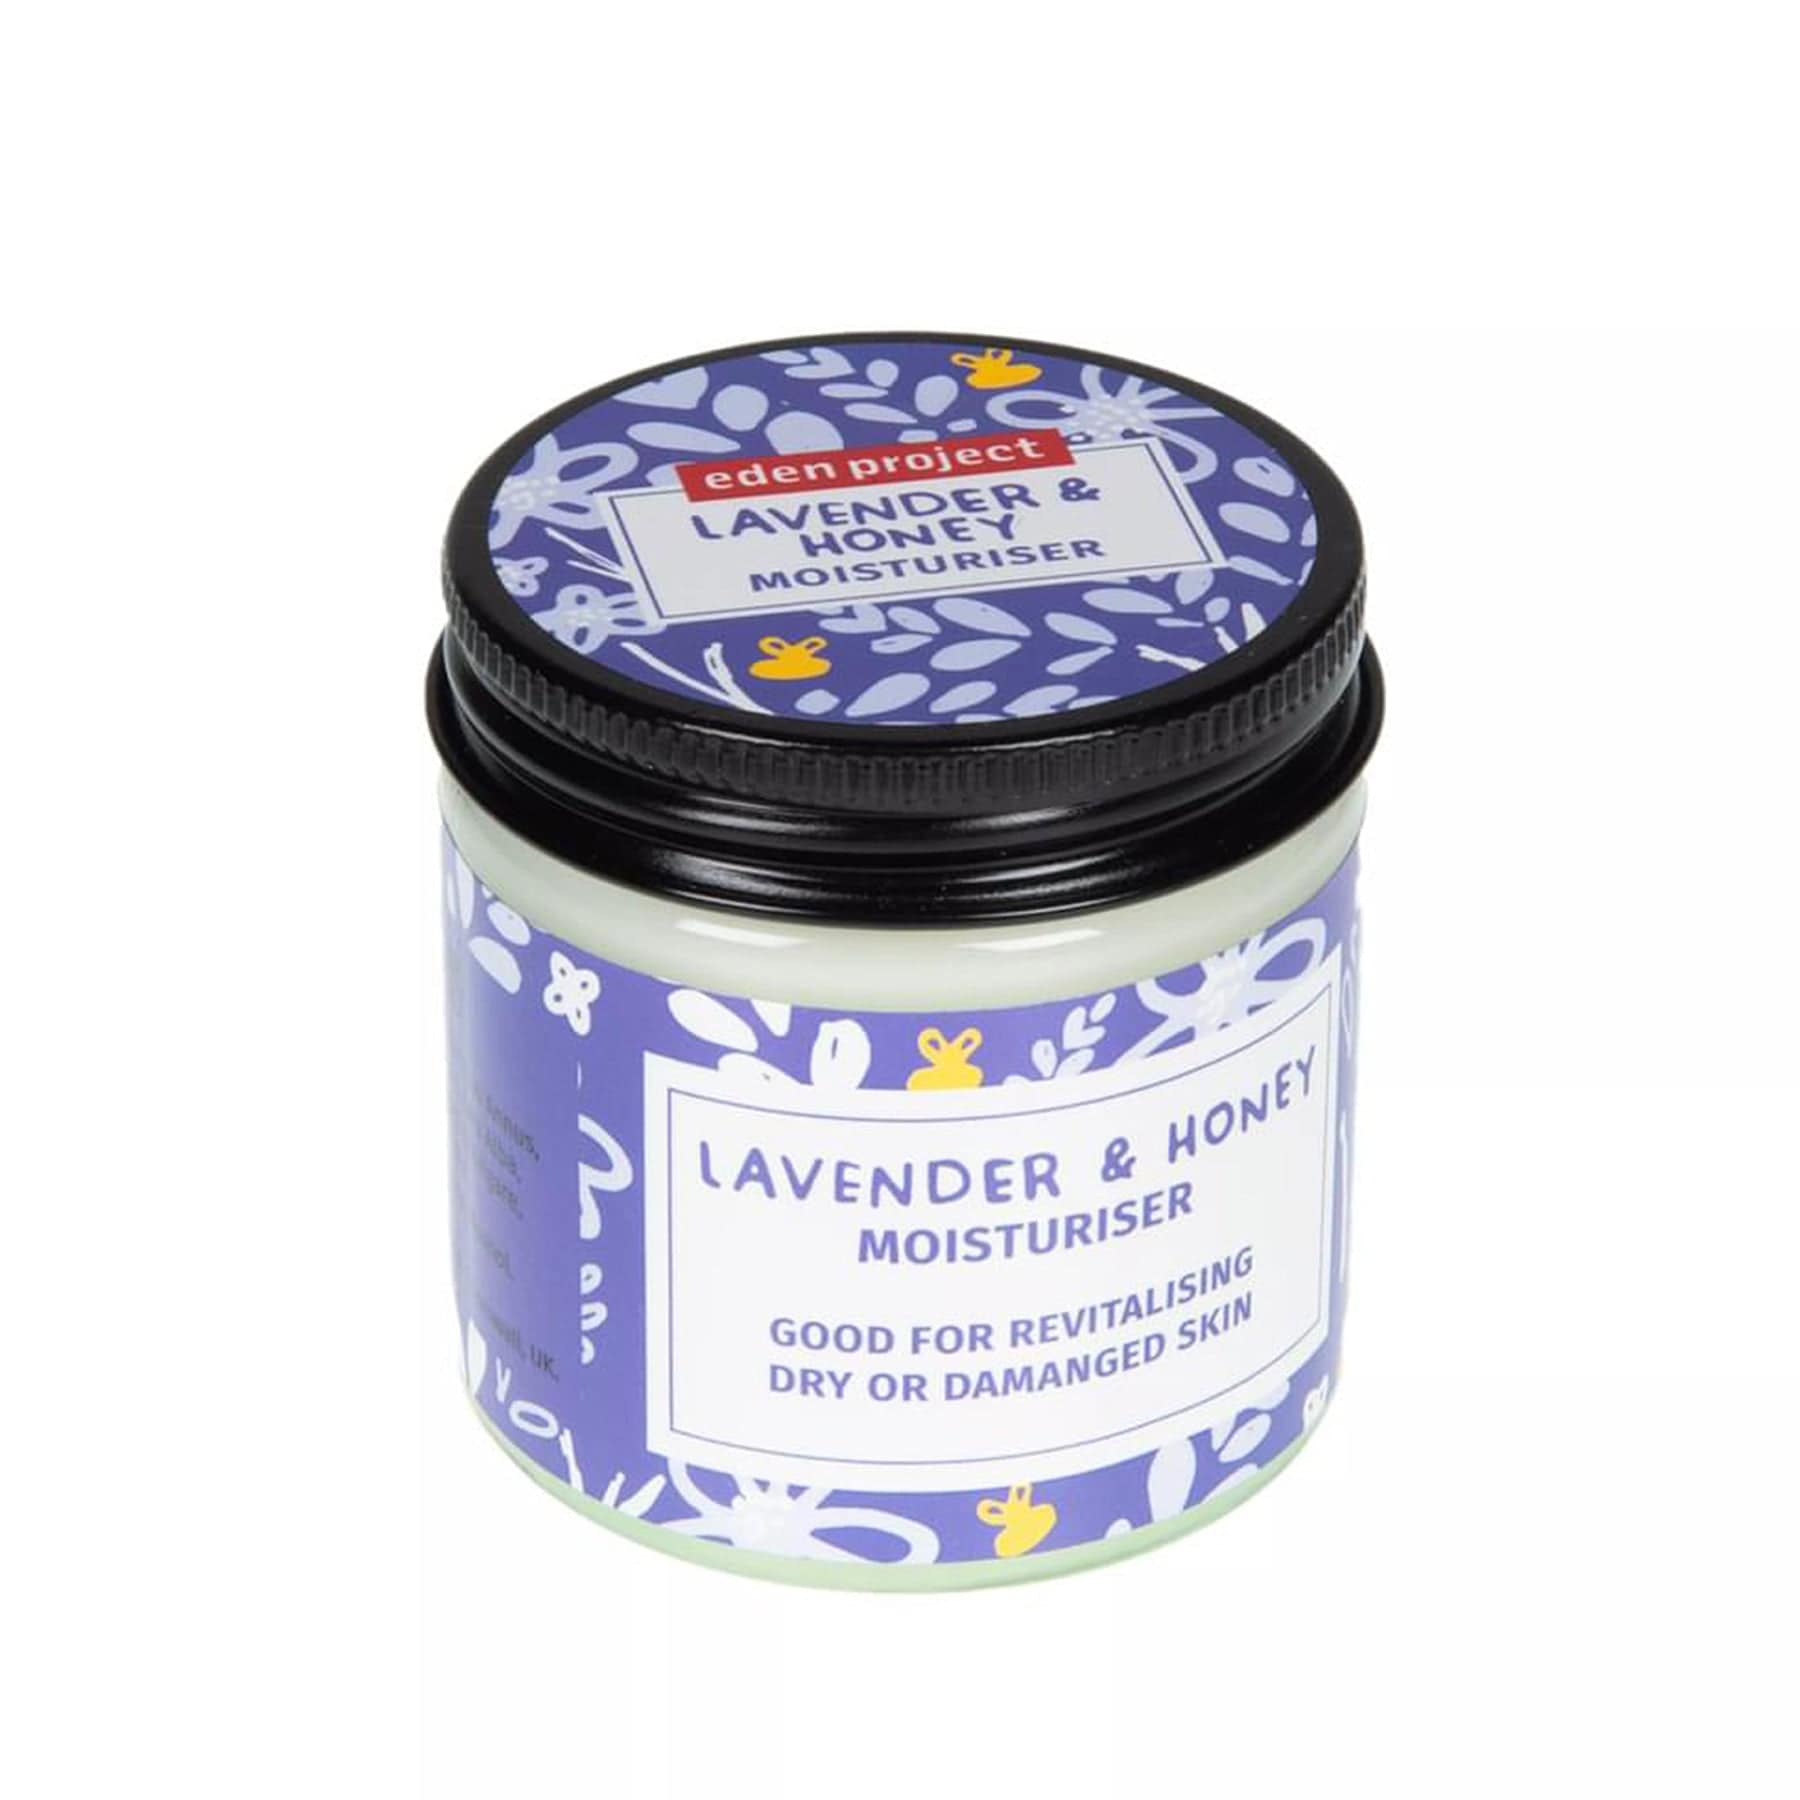 Eden Project Lavender and Honey Moisturiser container on white background, natural skincare product for revitalizing dry or damaged skin, featuring floral design packaging.